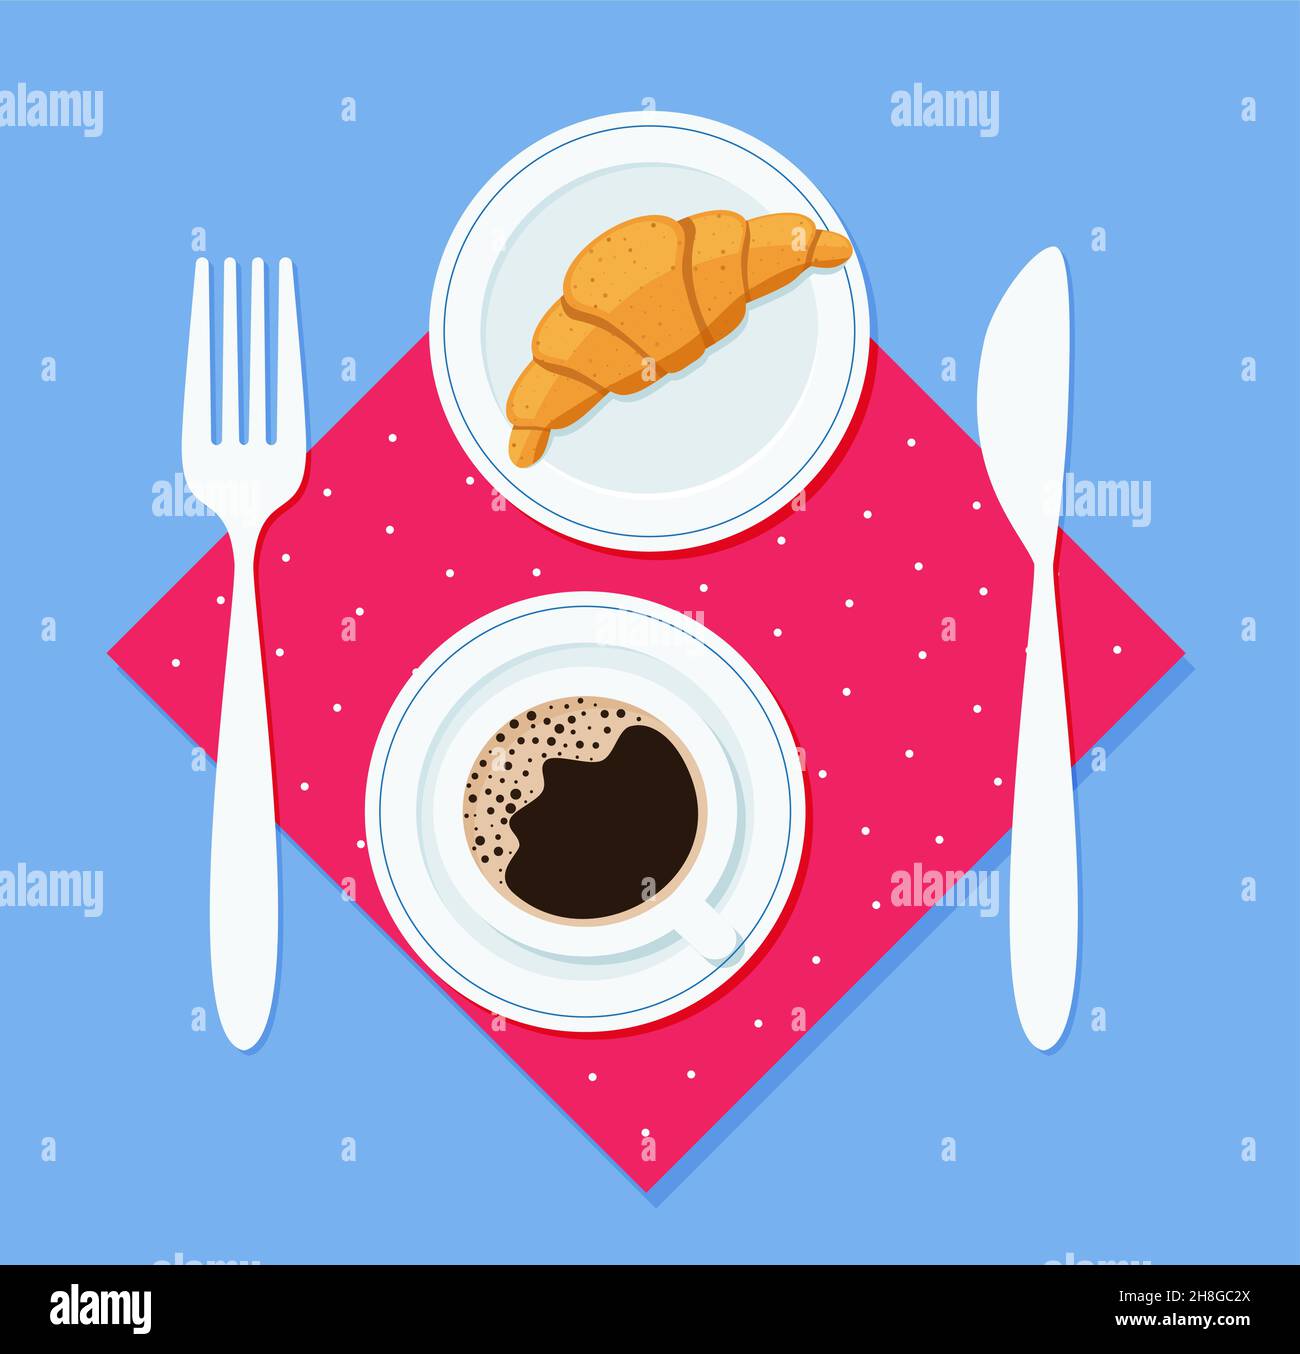 Breakfast croissant on a plate, with a fork and knife and a cup of coffee on a napkin. Vector illustration in flat style EPS 10 Stock Vector